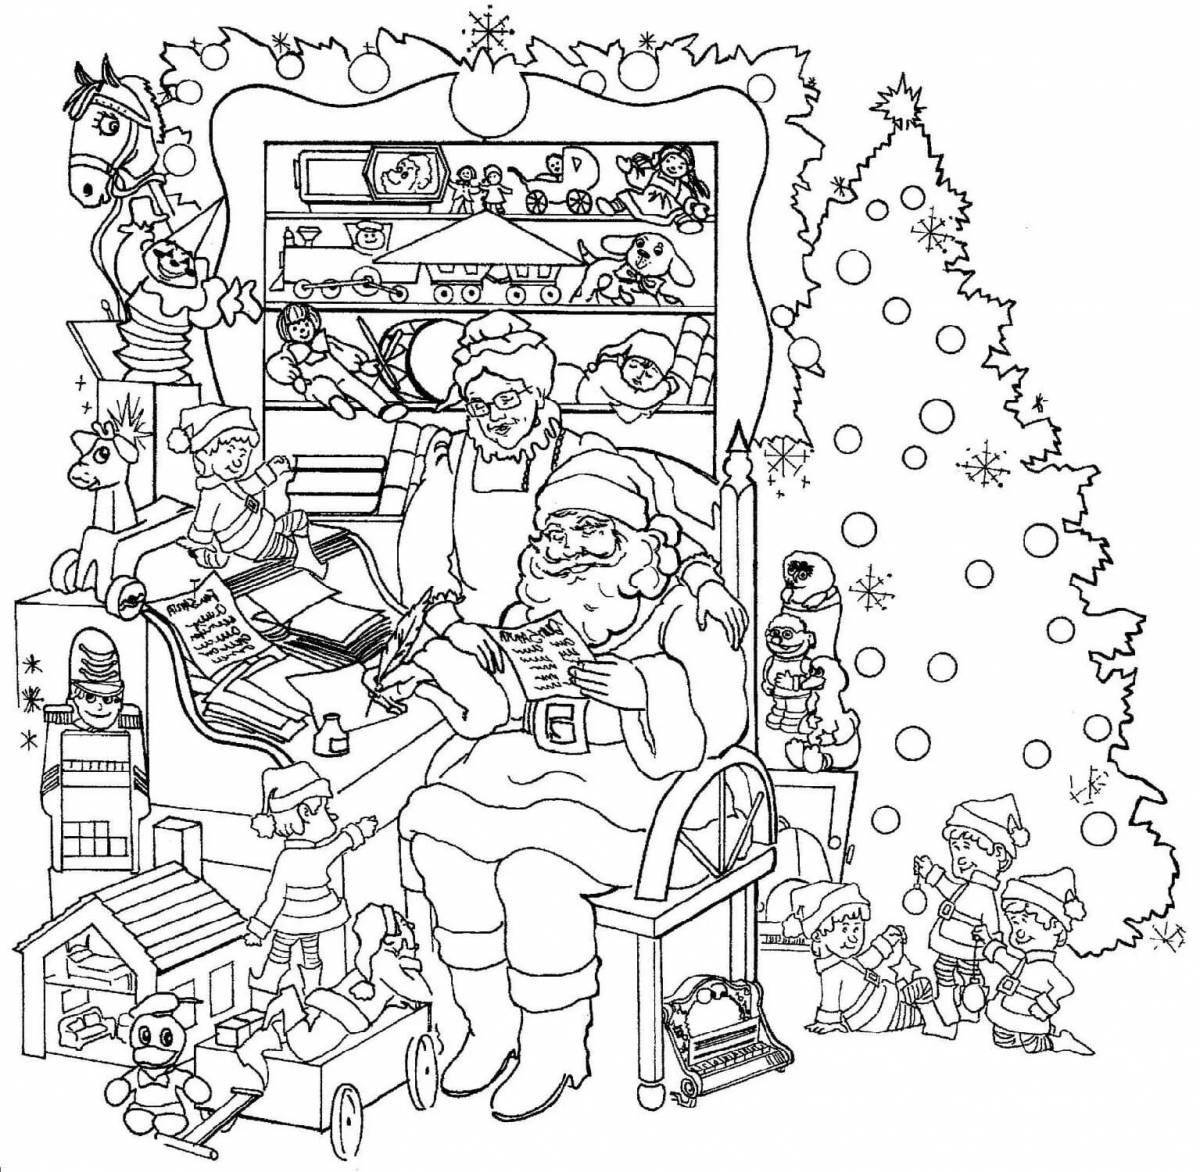 Exquisite Christmas complex coloring book